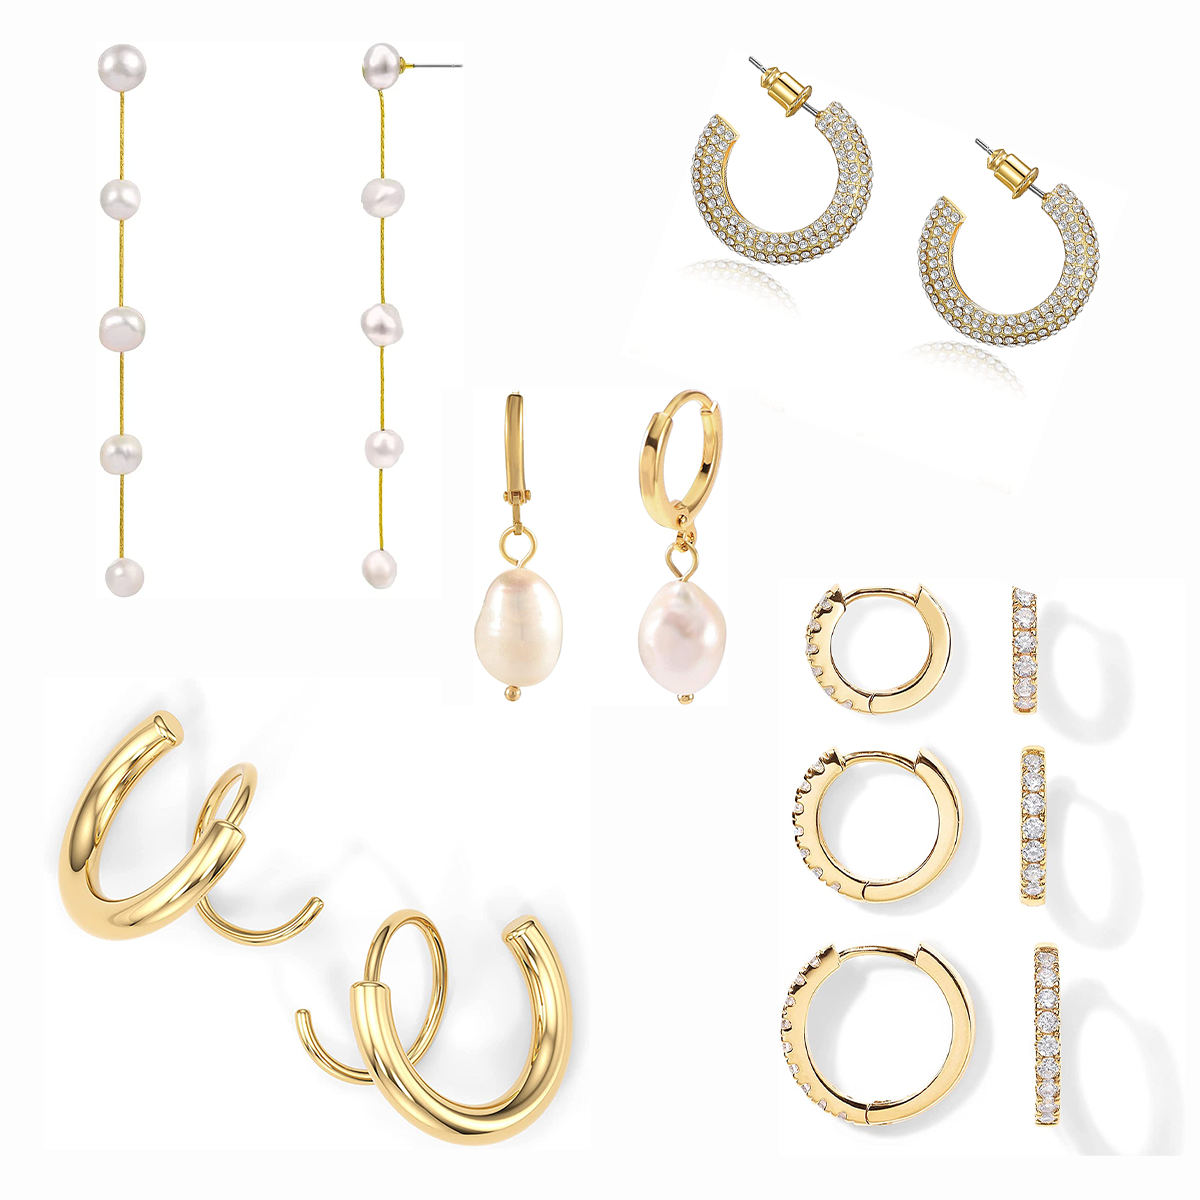 Amazon Has Kate Spade Earrings on Sale for $28, Plus So Many Other Cute & Affordable Studs & Hoops – E! Online